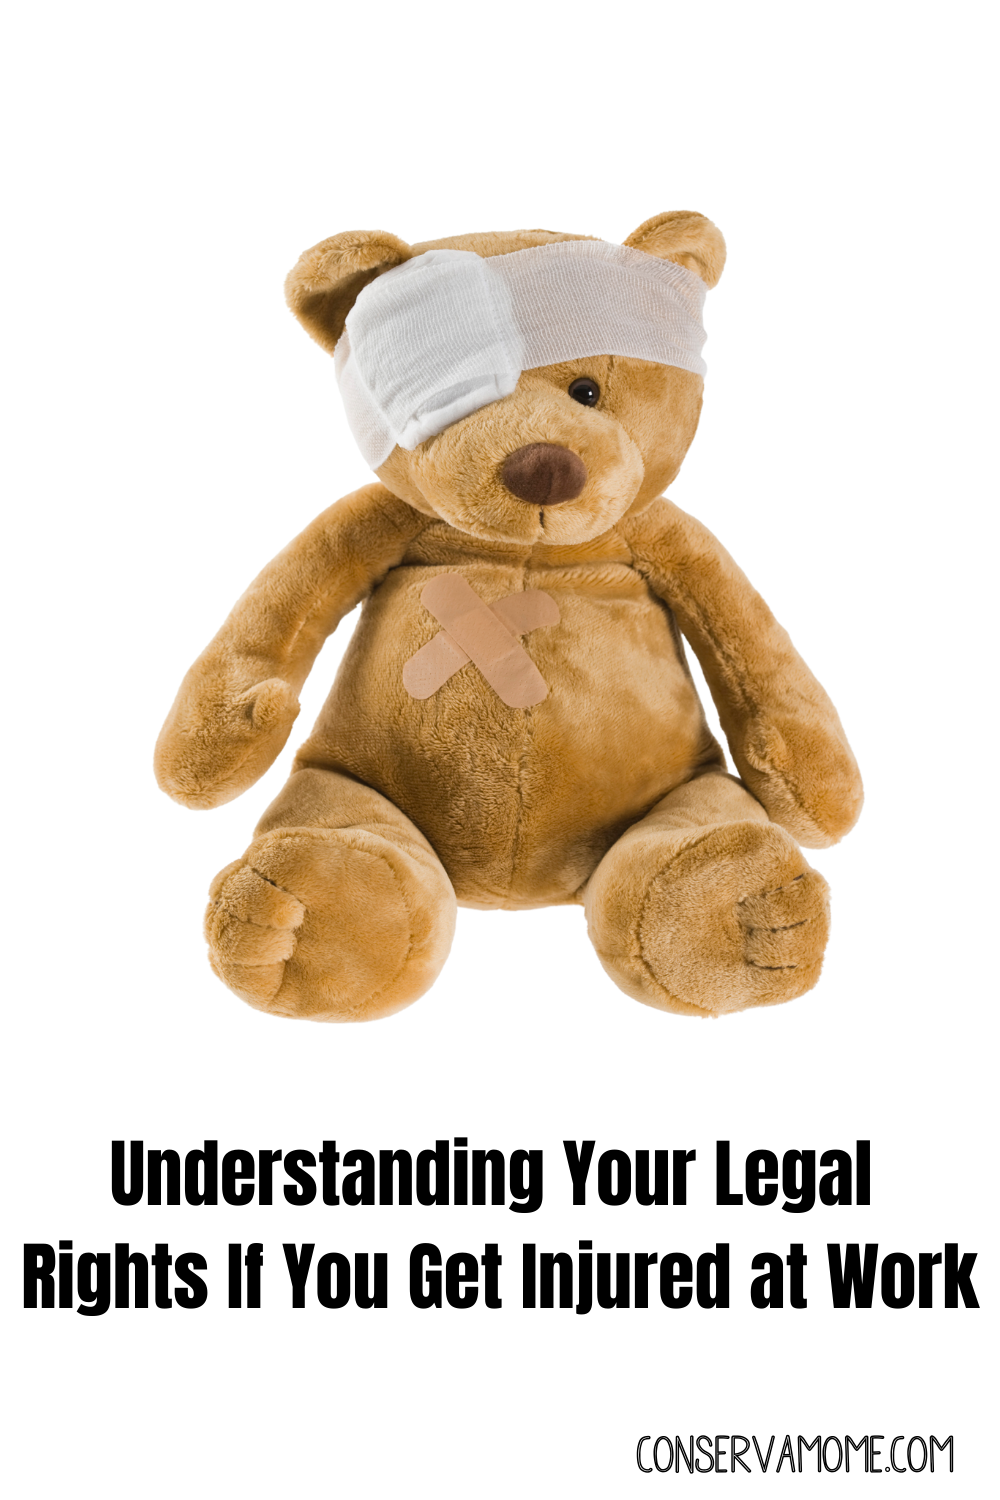 Understanding Your Legal Rights If You Get Injured at Work